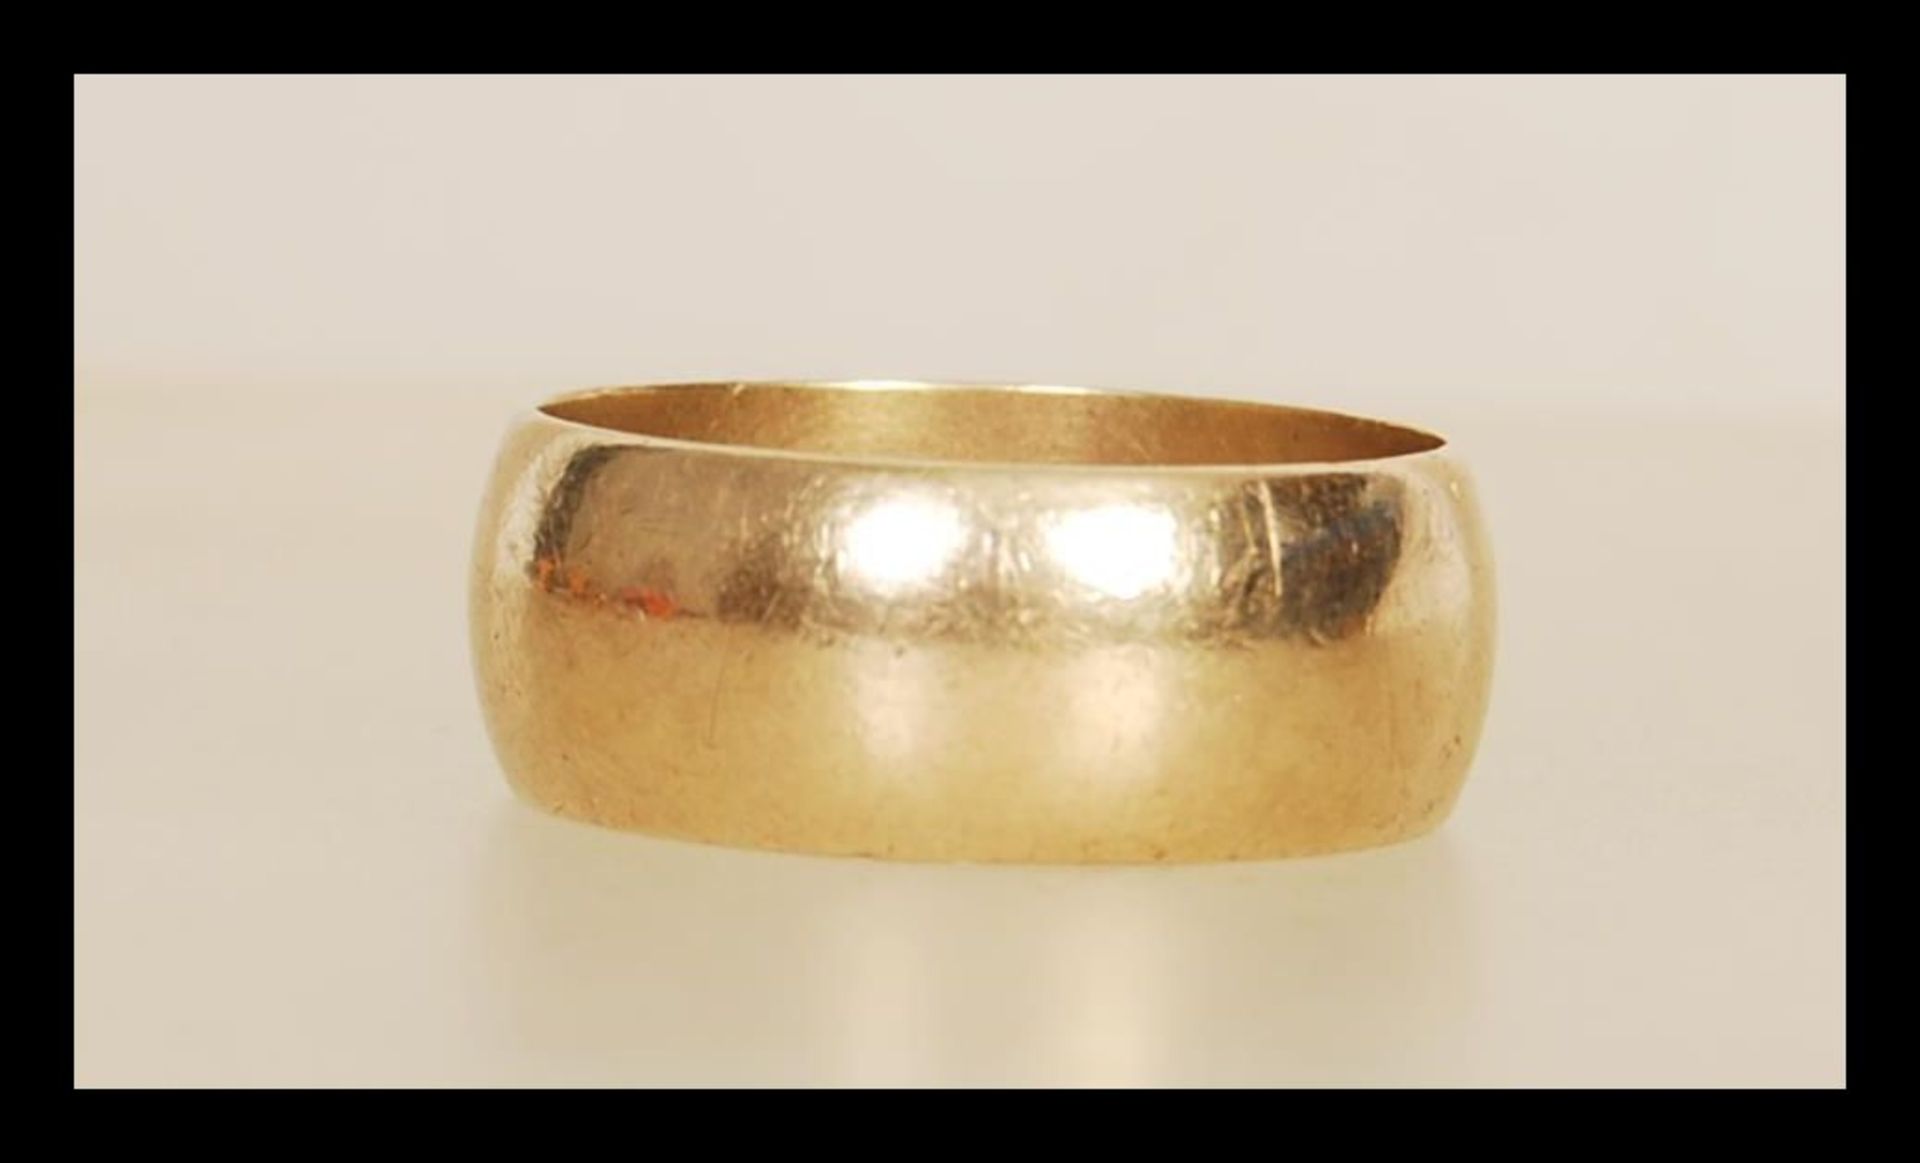 A 9ct gold wedding band ring having hallmarks for London dating 1975 and 375 stamped. Inside is